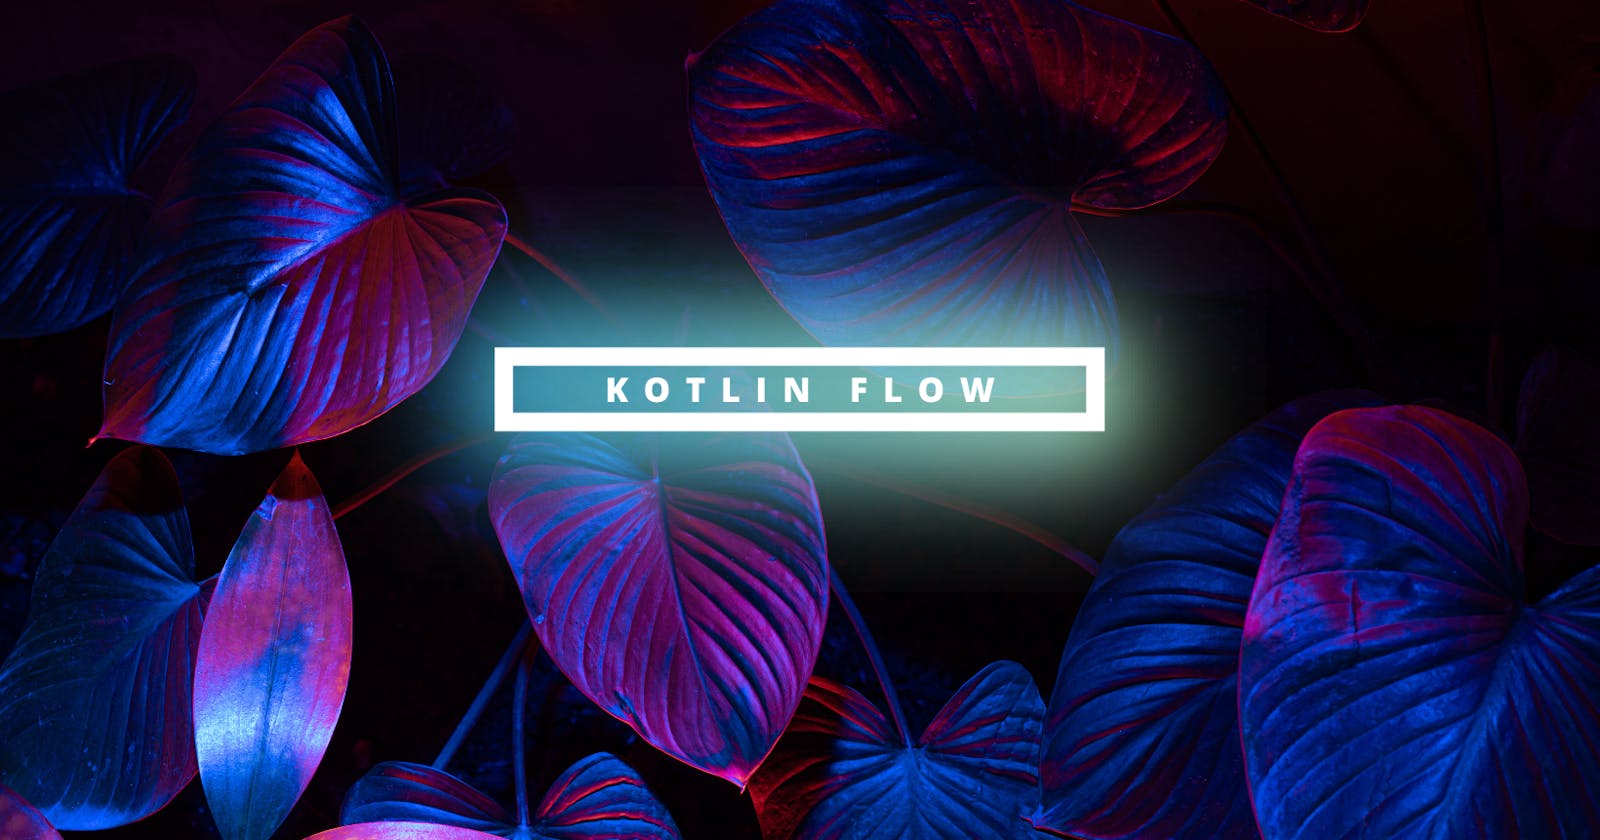 Detailed guide about Kotlin Flow